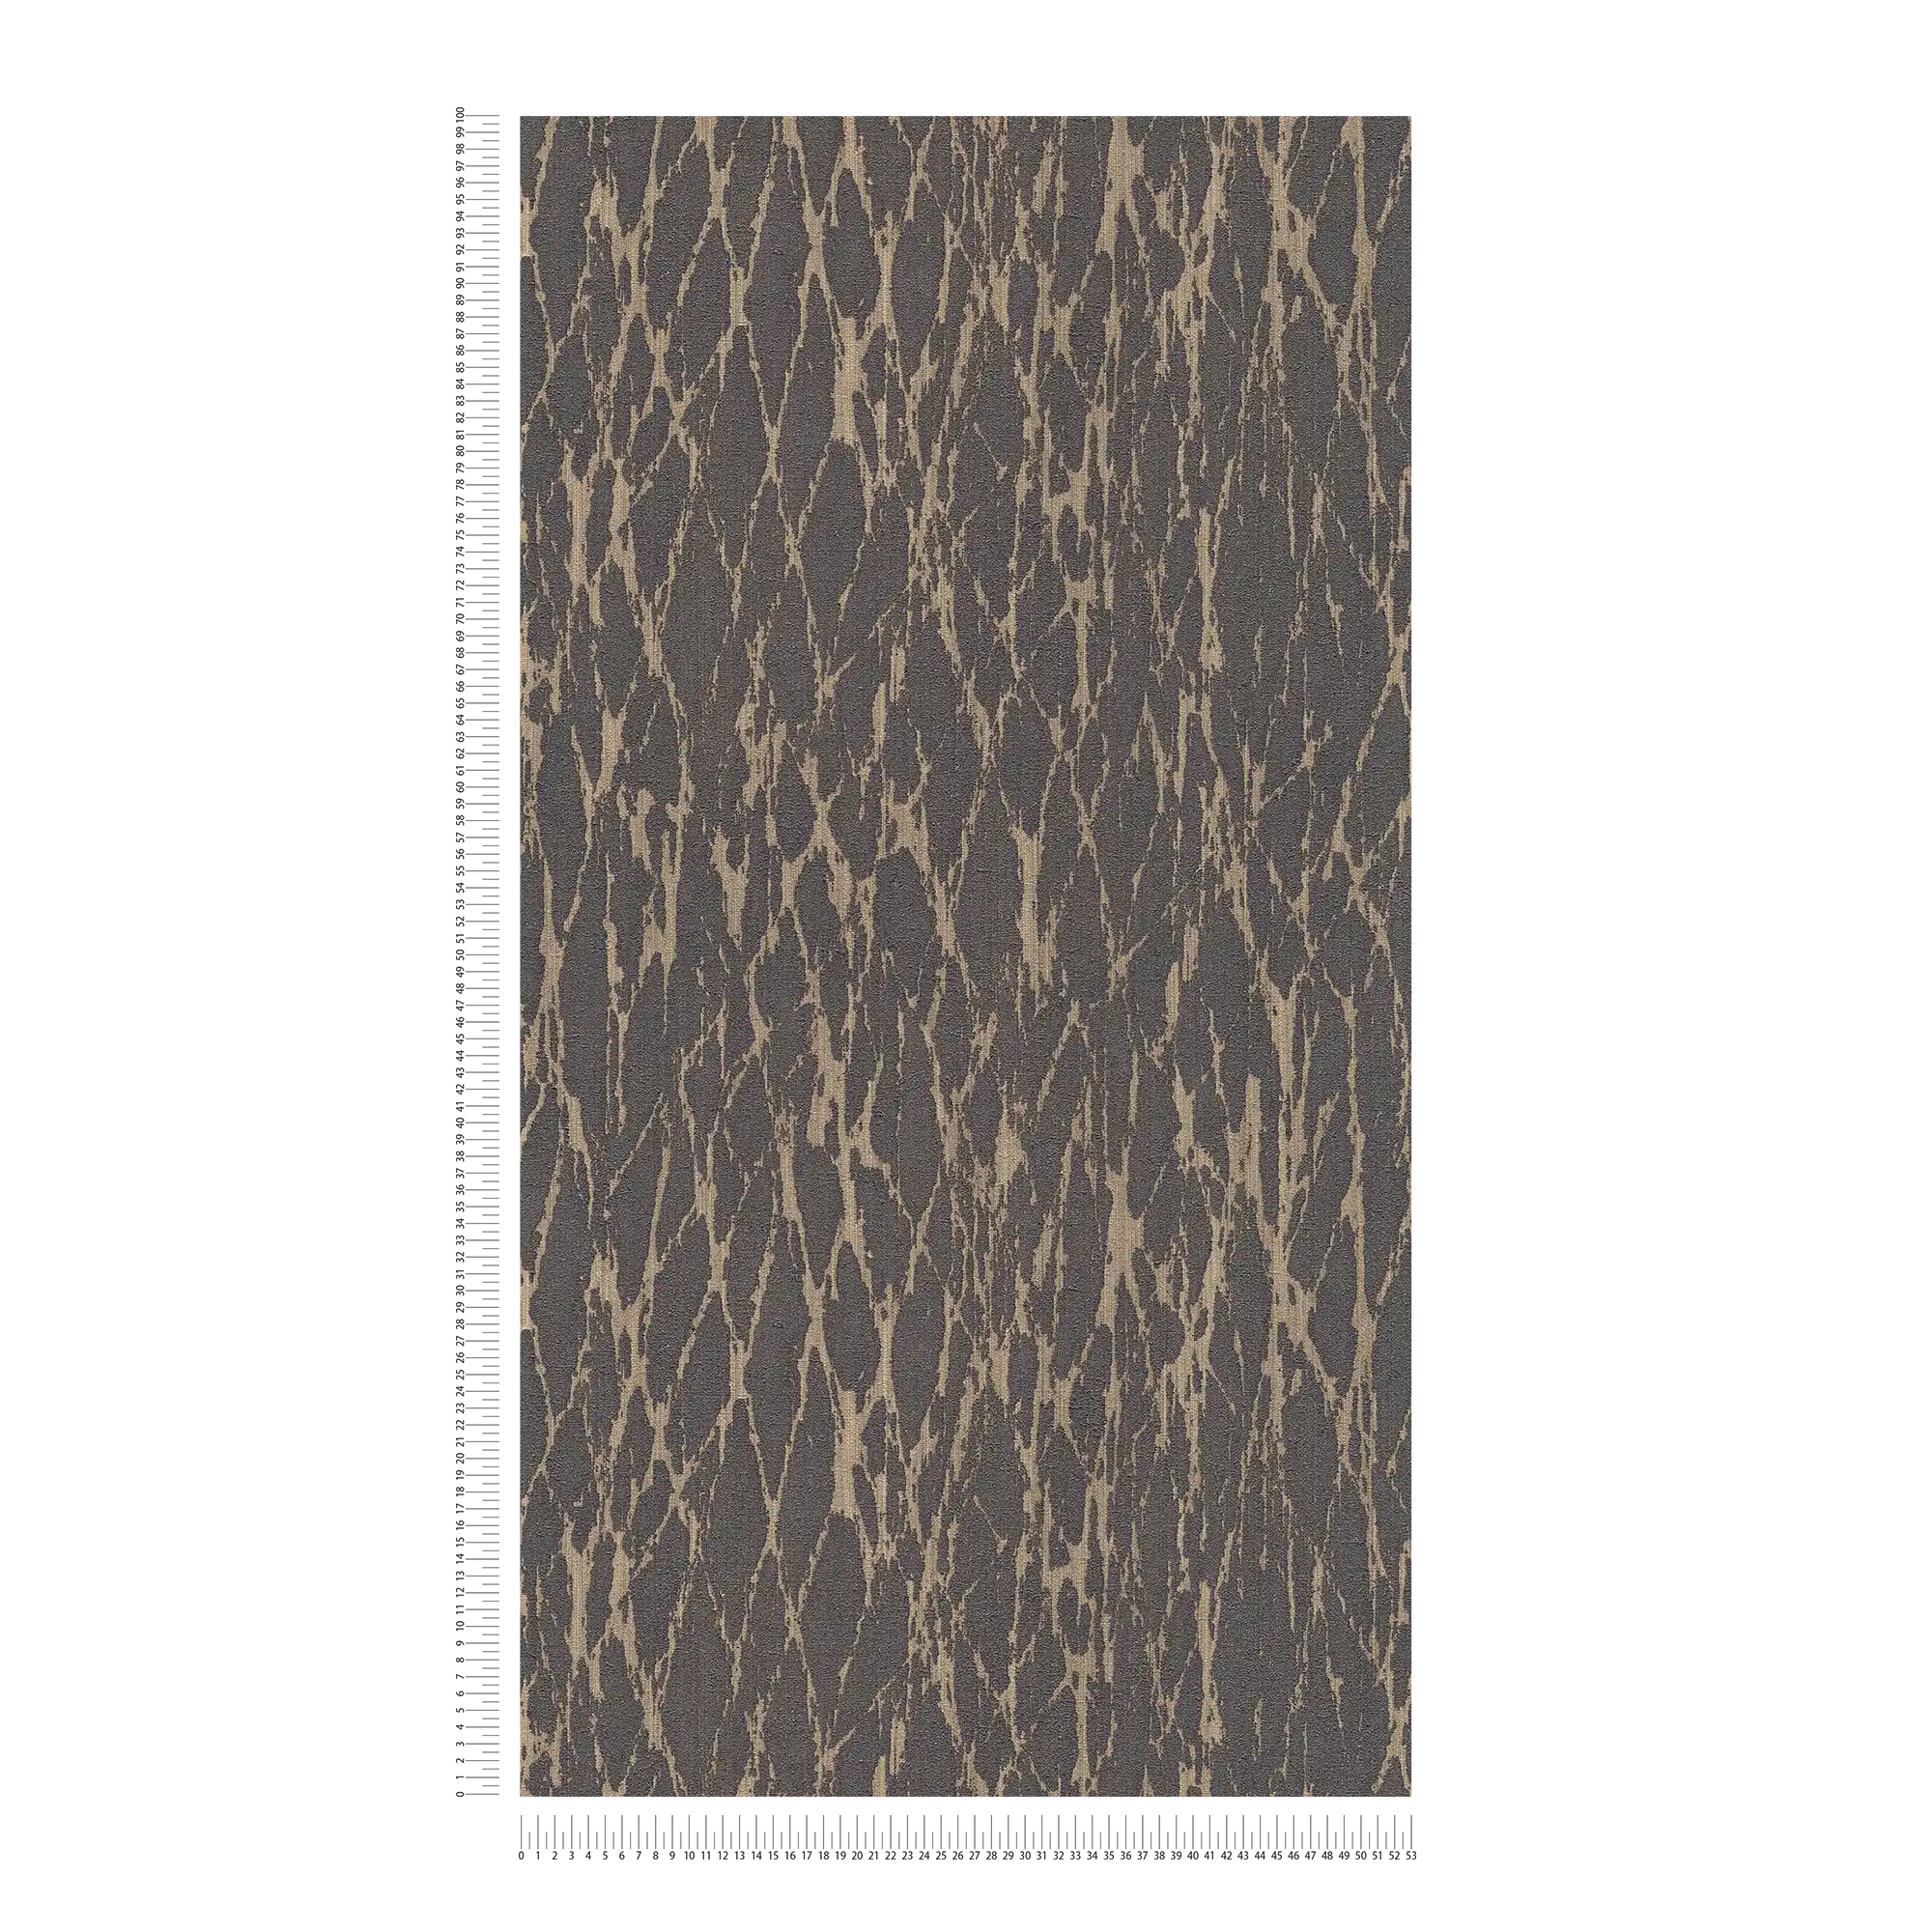             Non-woven wallpaper with wavy line pattern - black, brown, beige
        